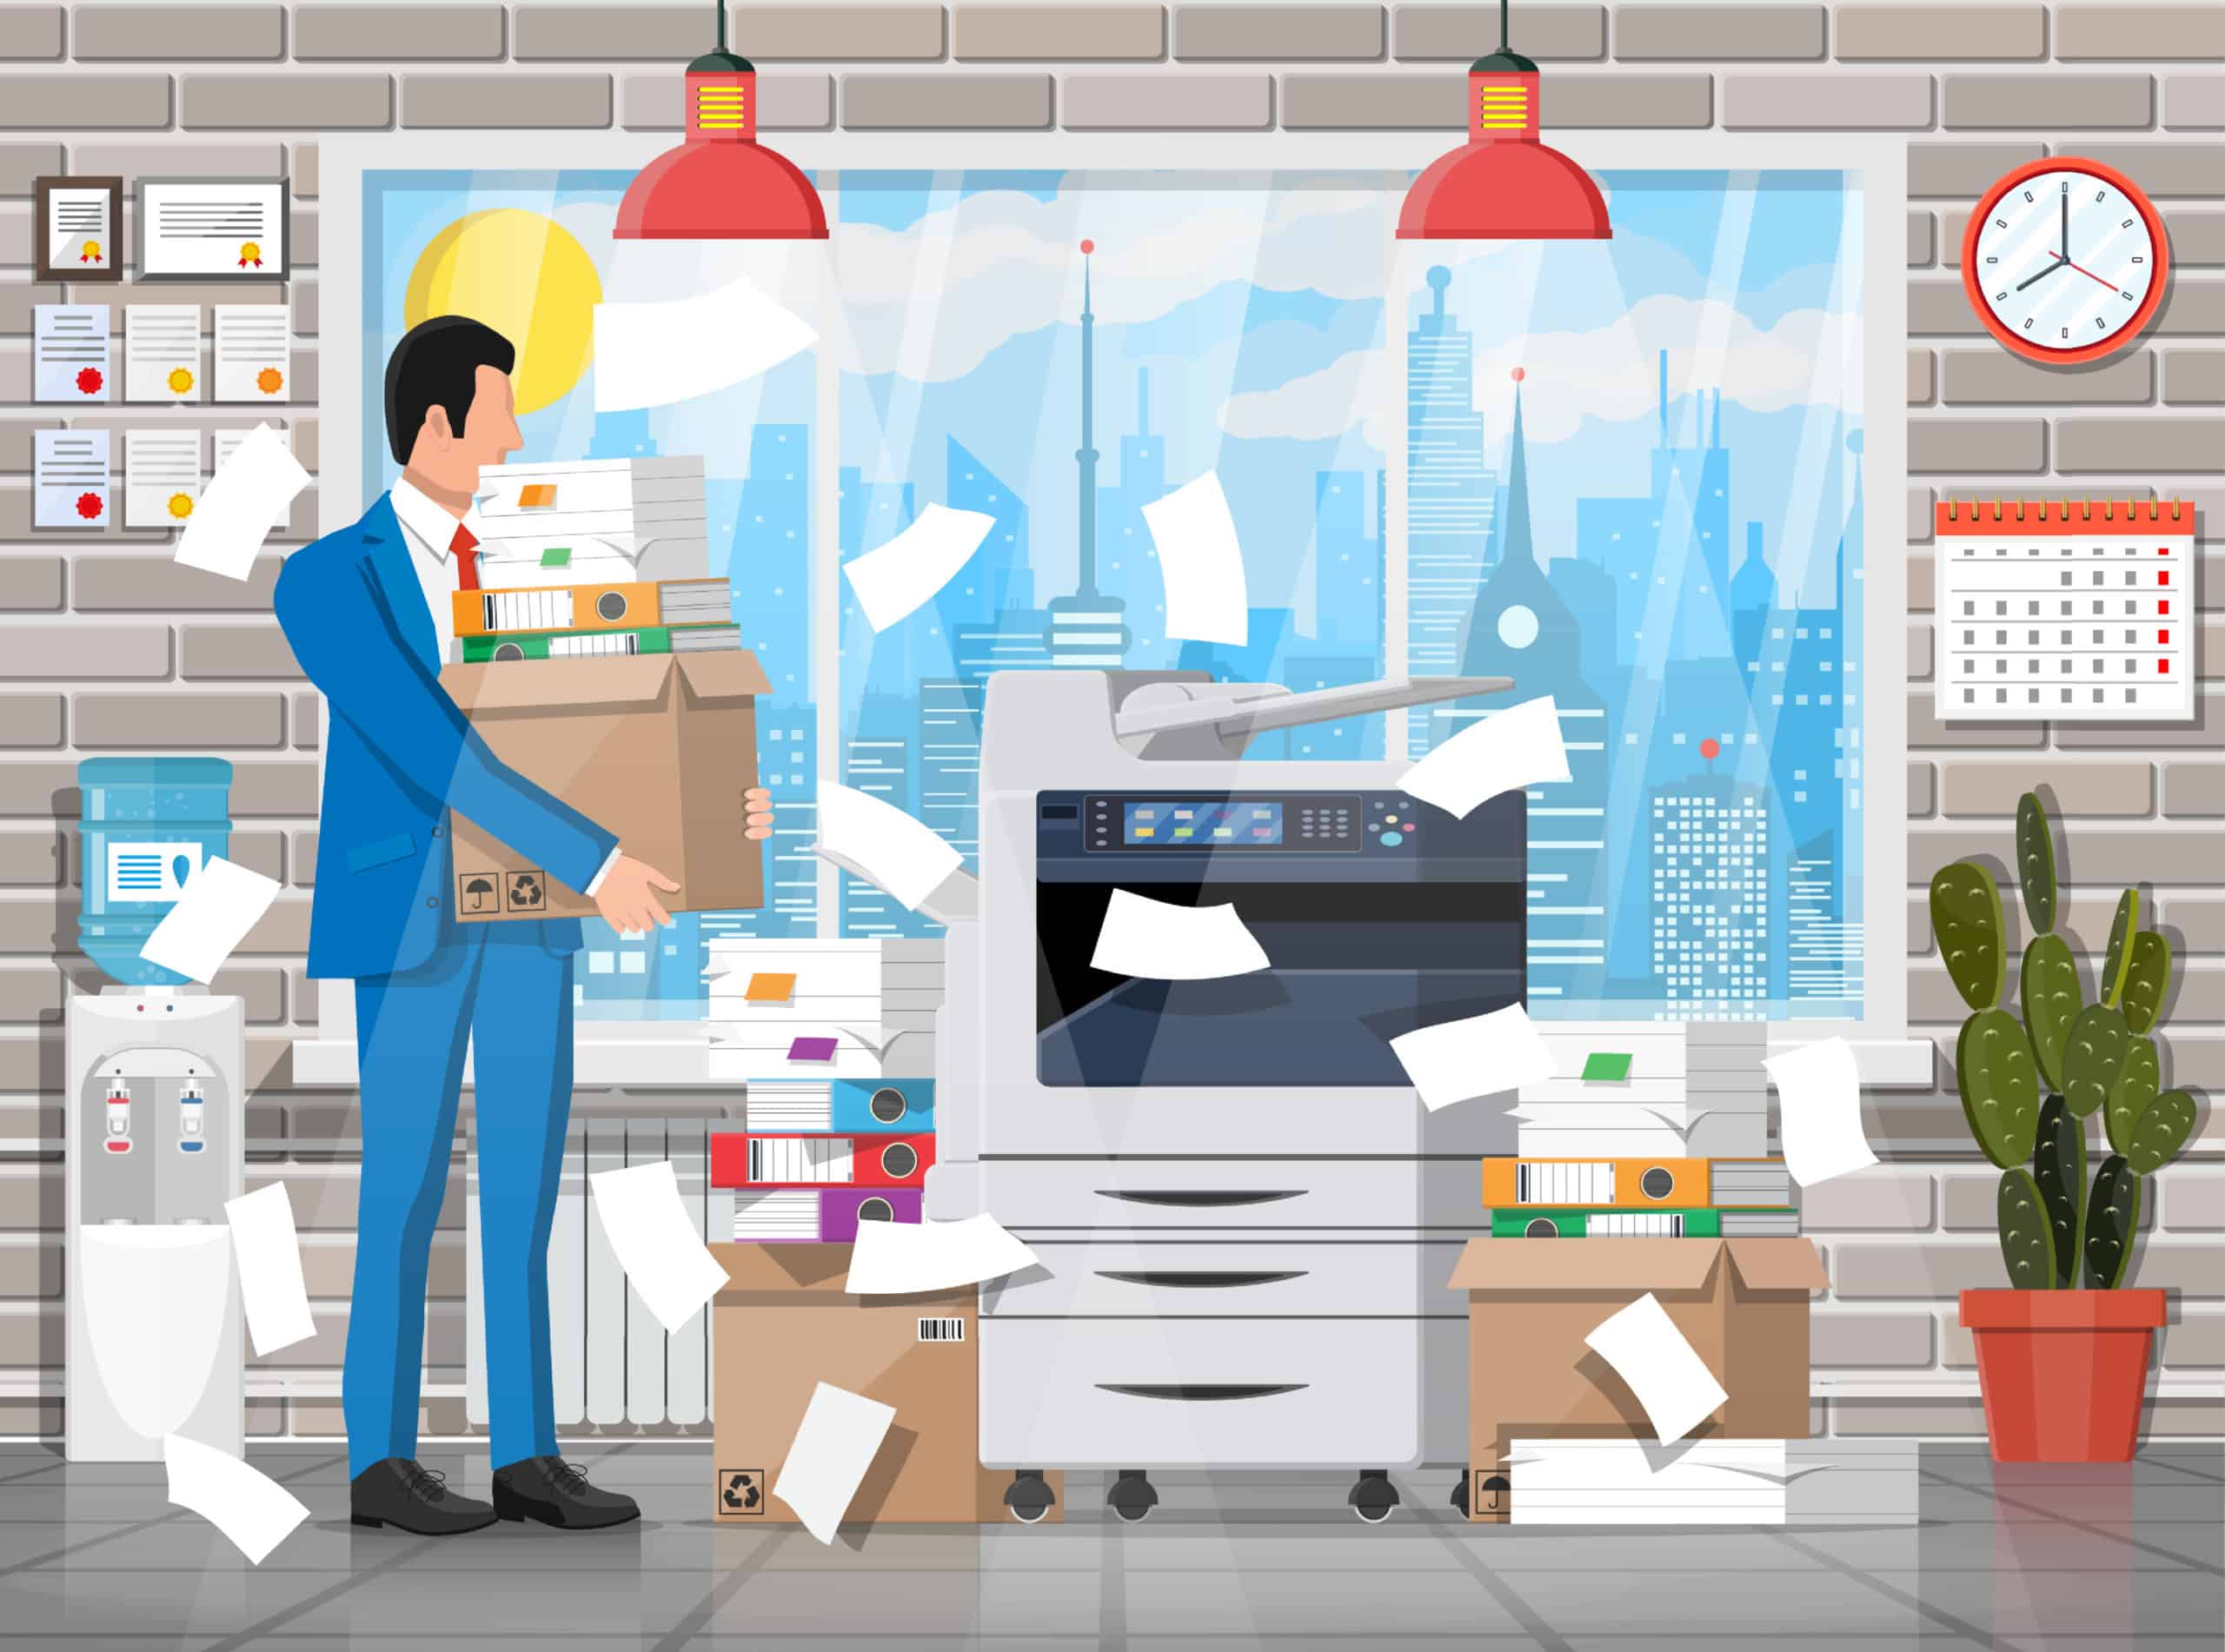 Stressed businessman under pile of office papers and documents. Office building interior. Office documents heap. Routine, bureaucracy, big data, paperwork, office.